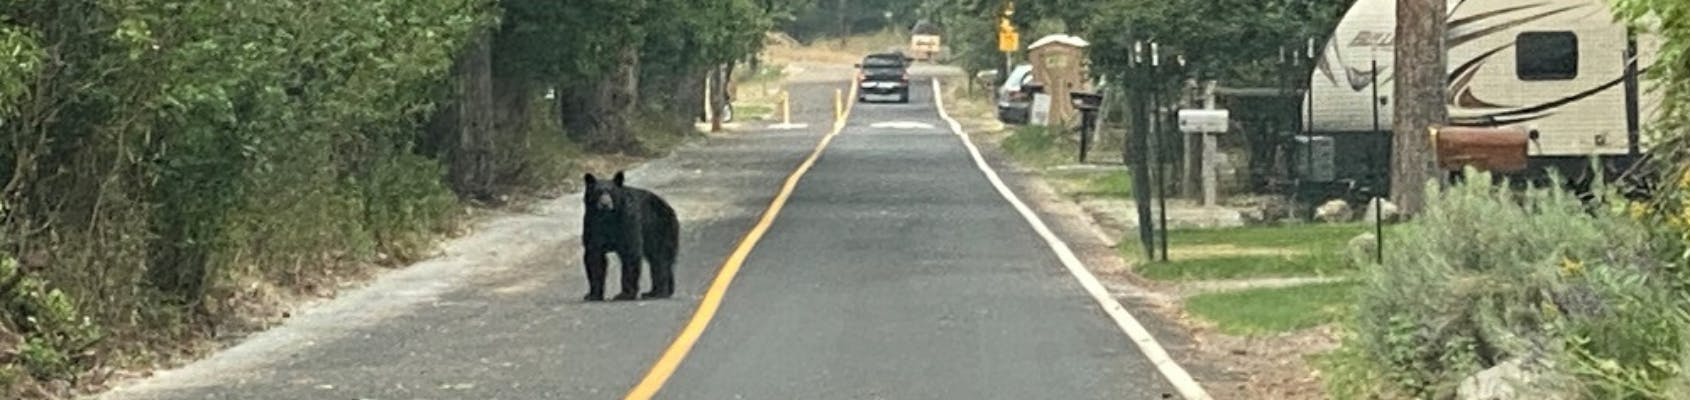 Black bear on the road in the Rattlesnake with a truck in the background